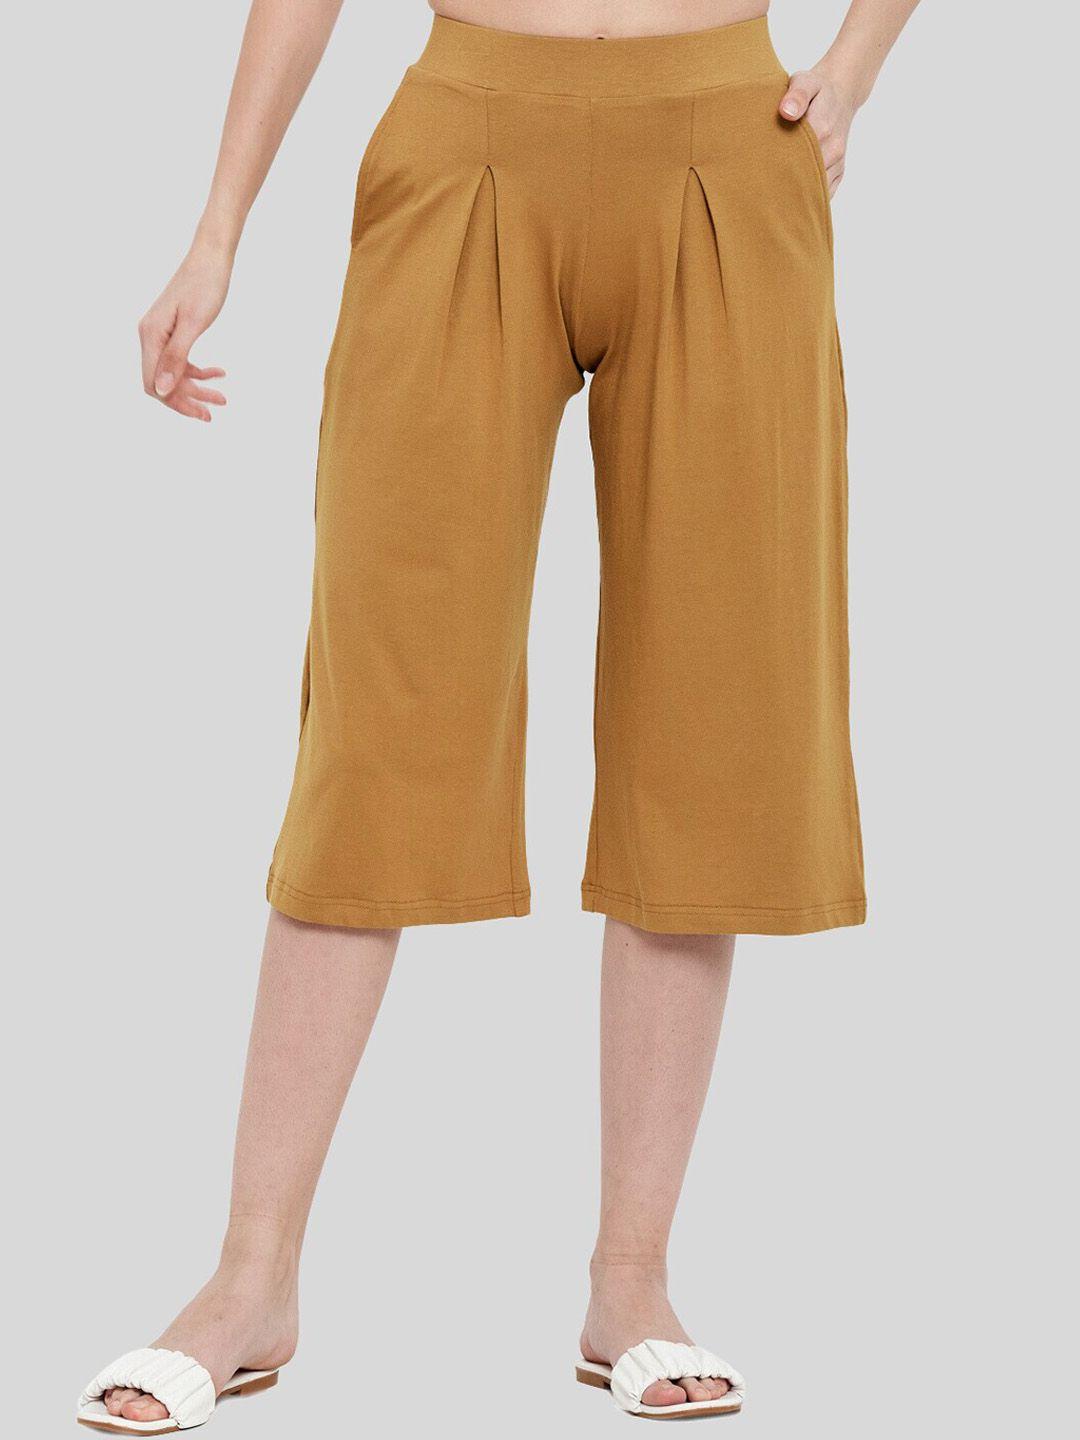 unmade women mid rise regular fit pleated culottes trousers